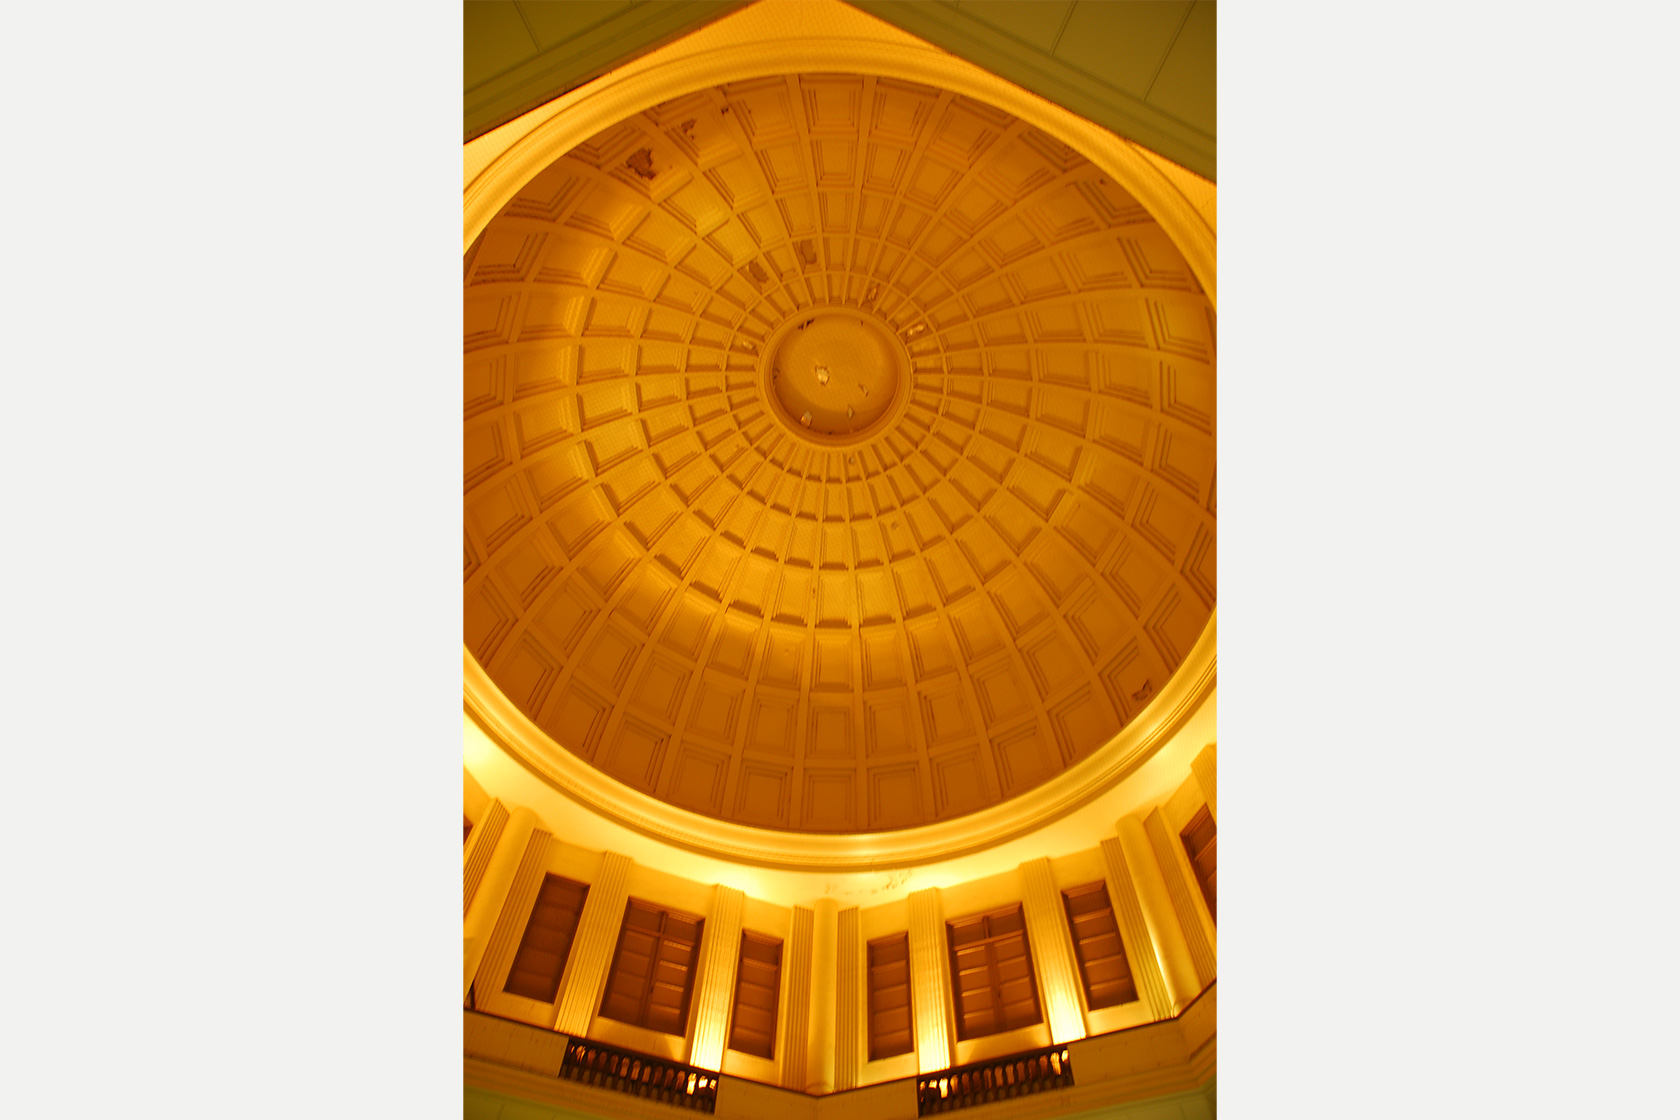 Restored dome ceiling after WWII